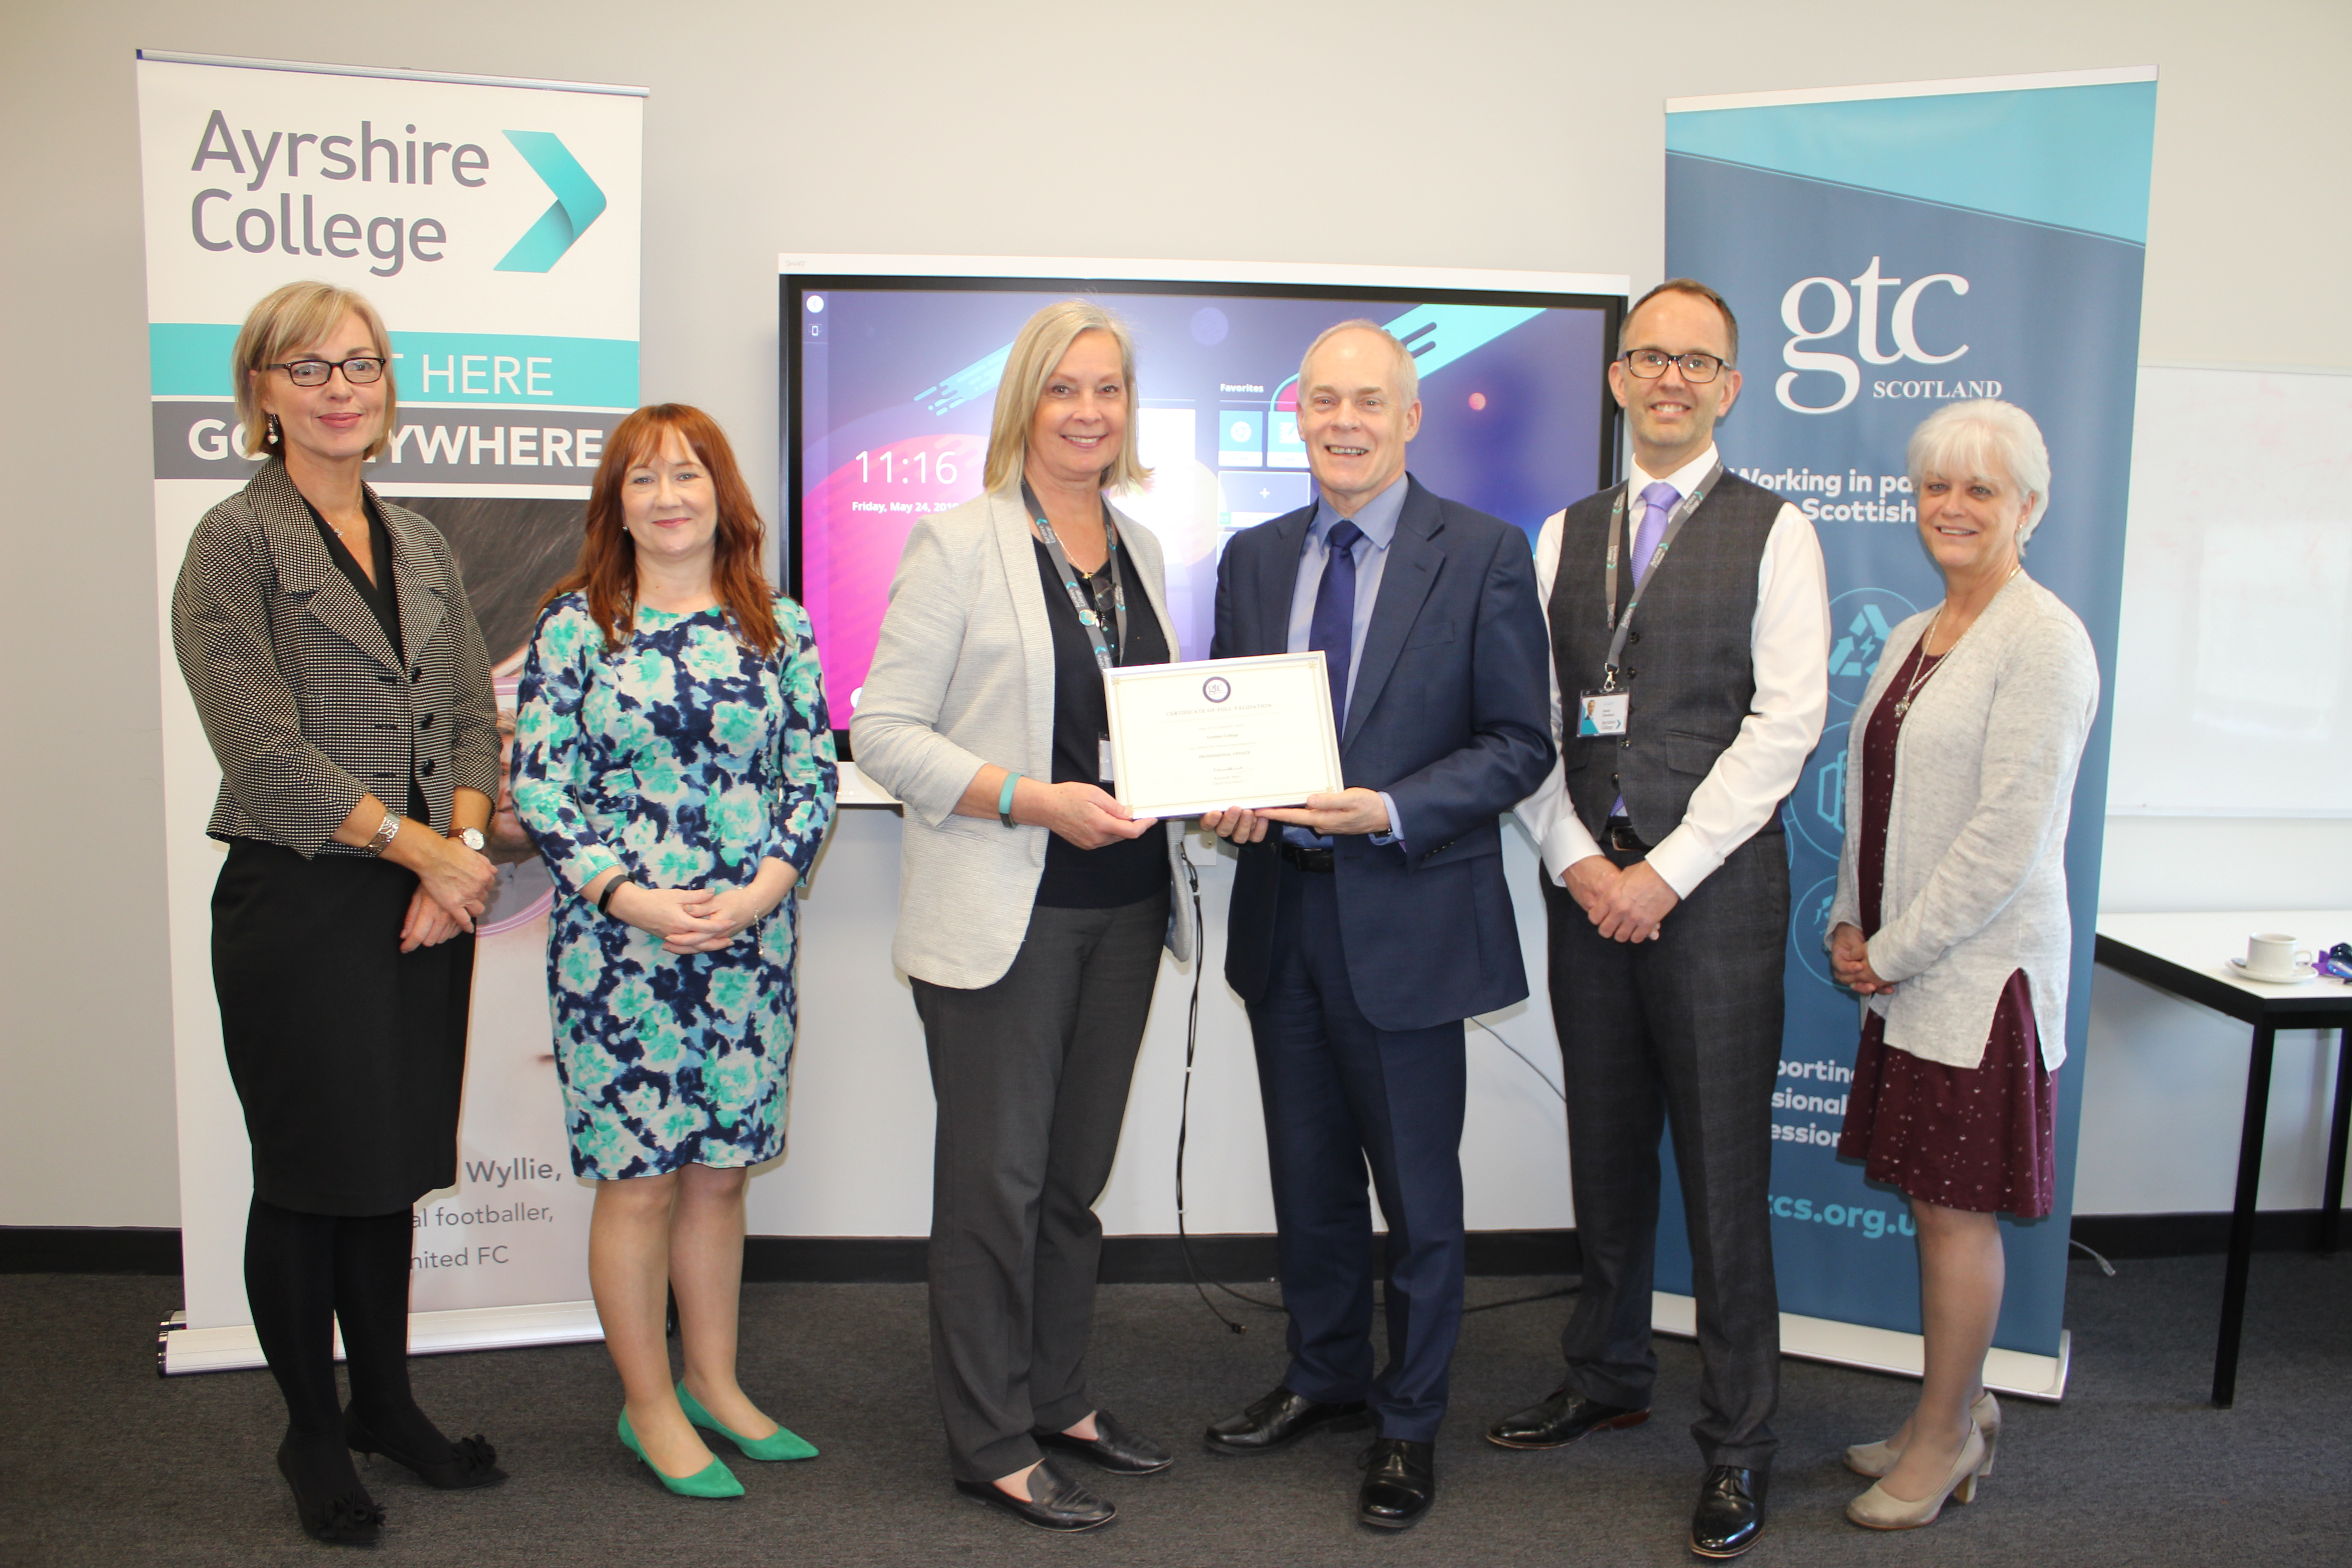 GTCS awards Ayrshire College professional update validation